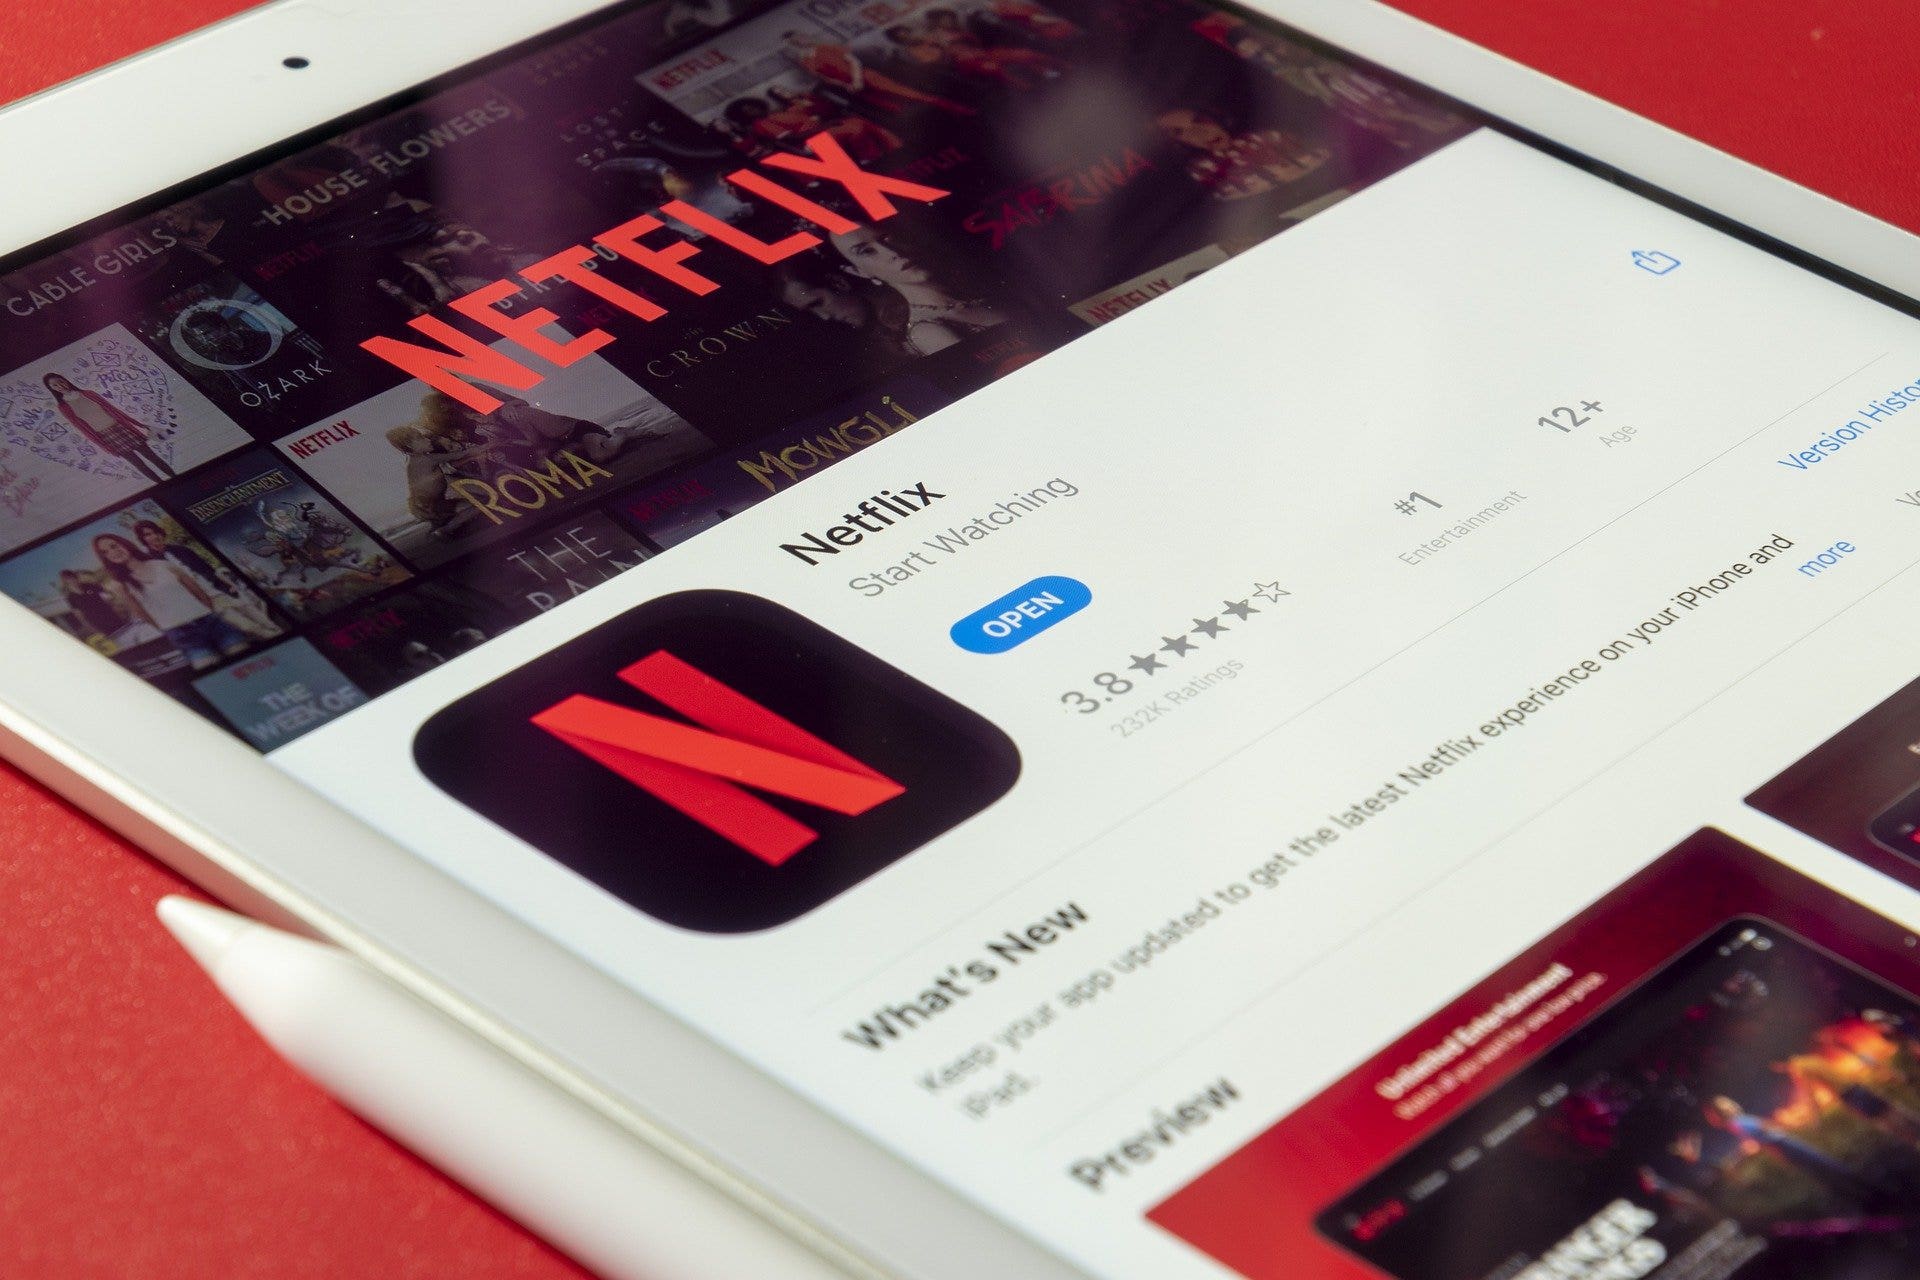 Ad-Supported Plan From Netflix Not Priced Into Stock: 'Can Drive A Material Reacceleration In Revenue Growth'